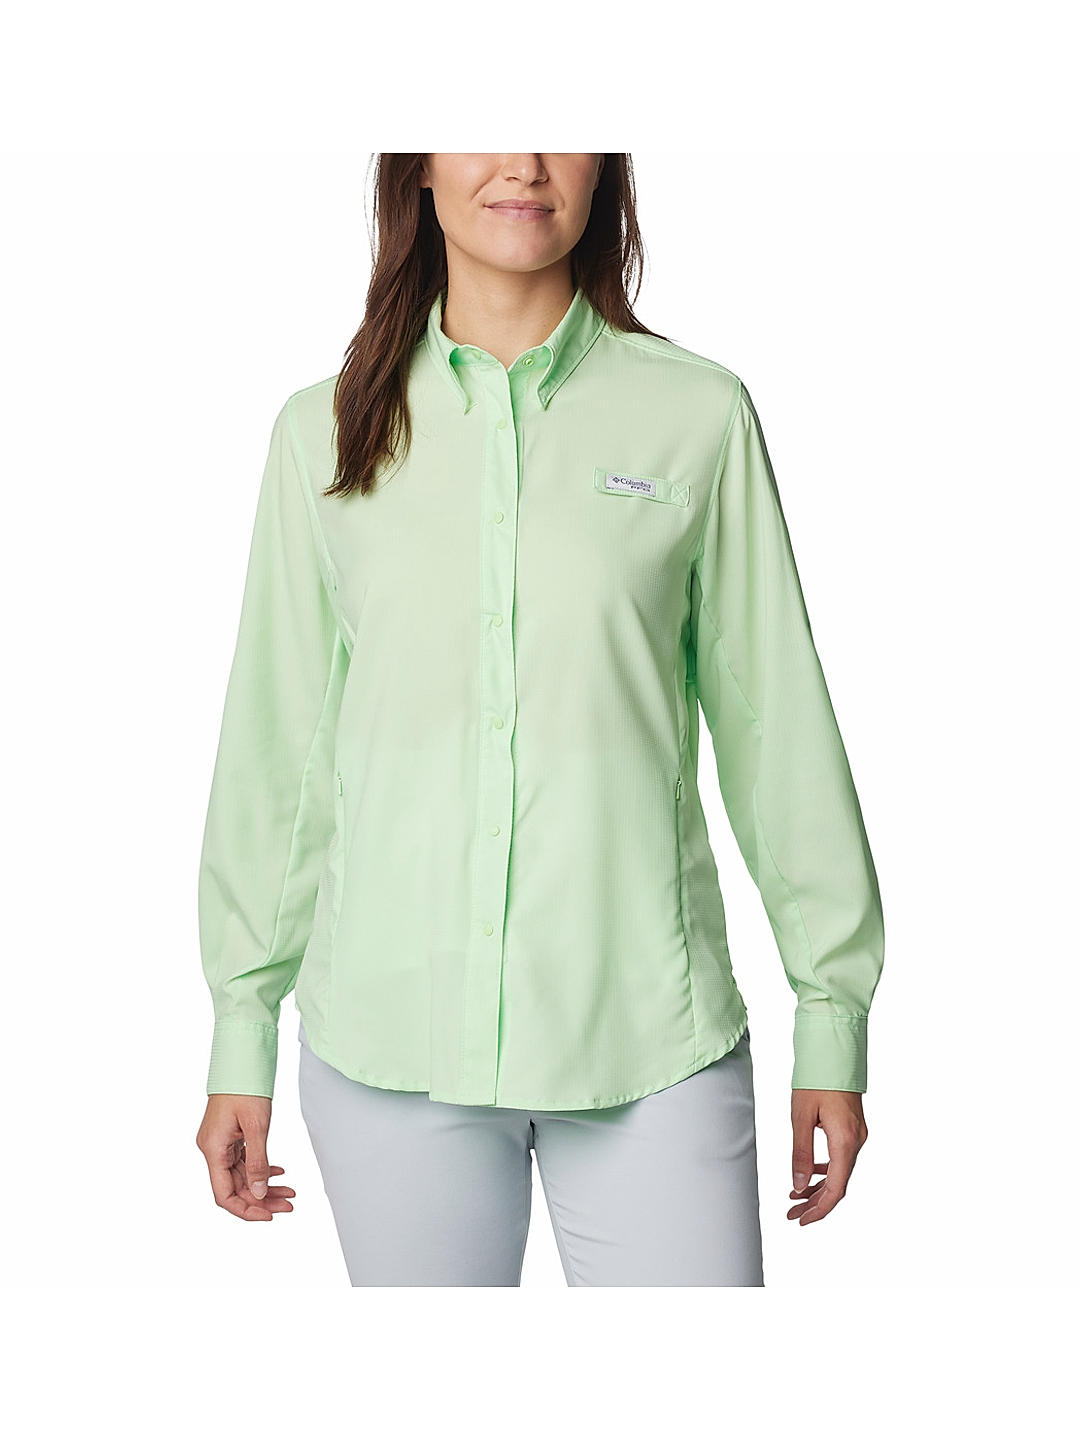 Buy Green Womens Tamiami II LS Shirt for Women Online at Columbia